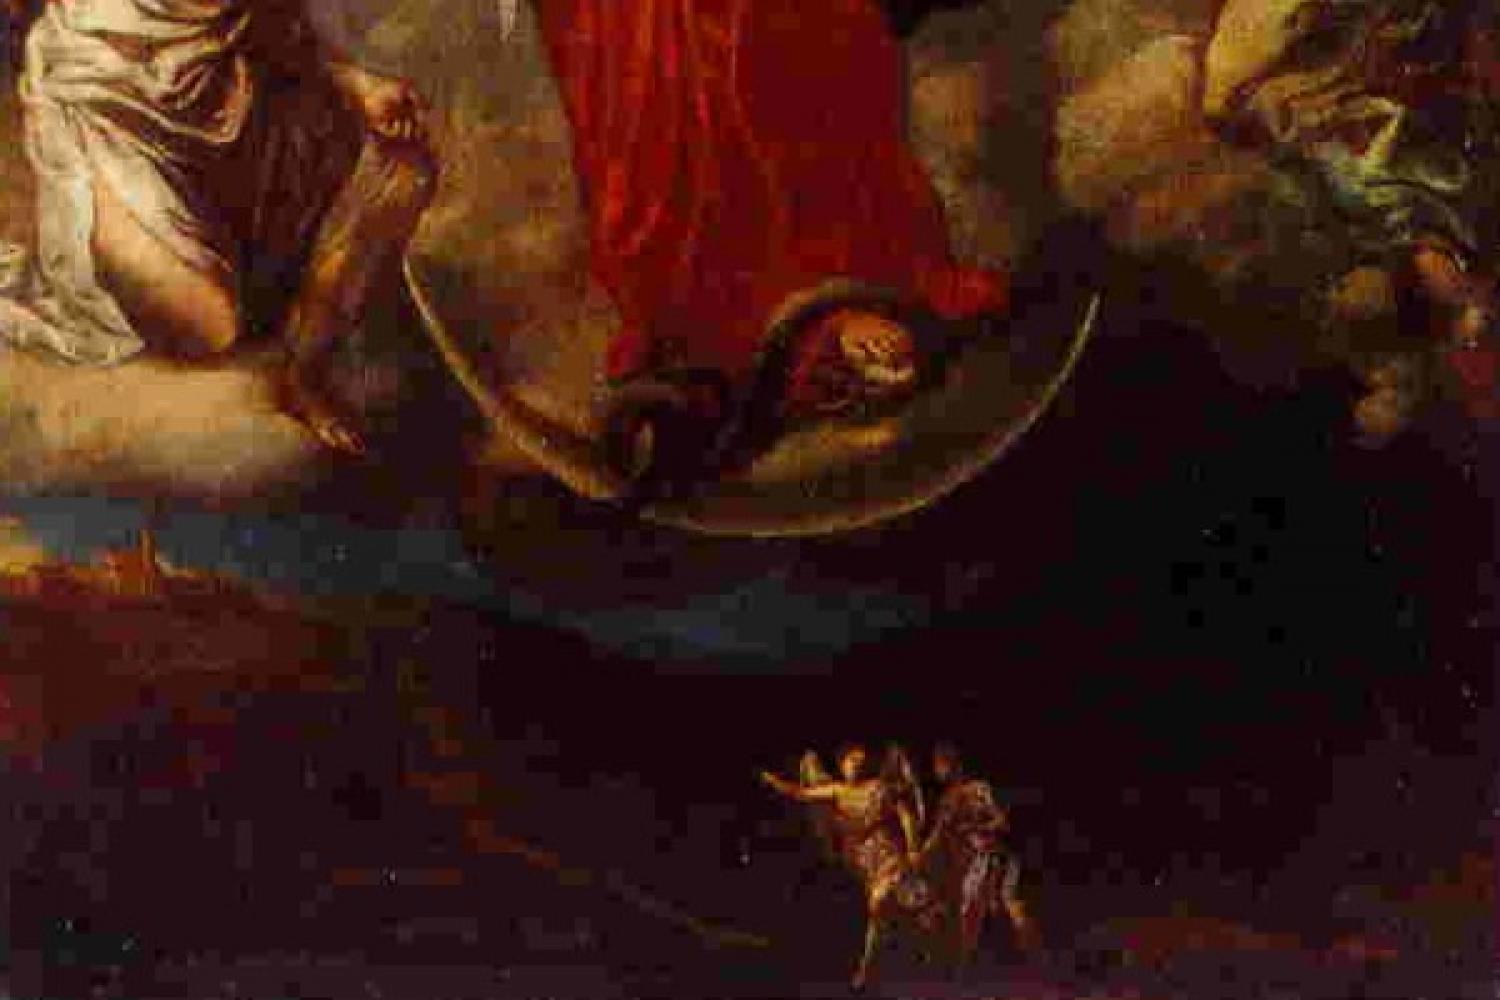 The bottom of Schmidtner's painting, showing the knotted snake at Tobias, his dog, and St. Raphael.